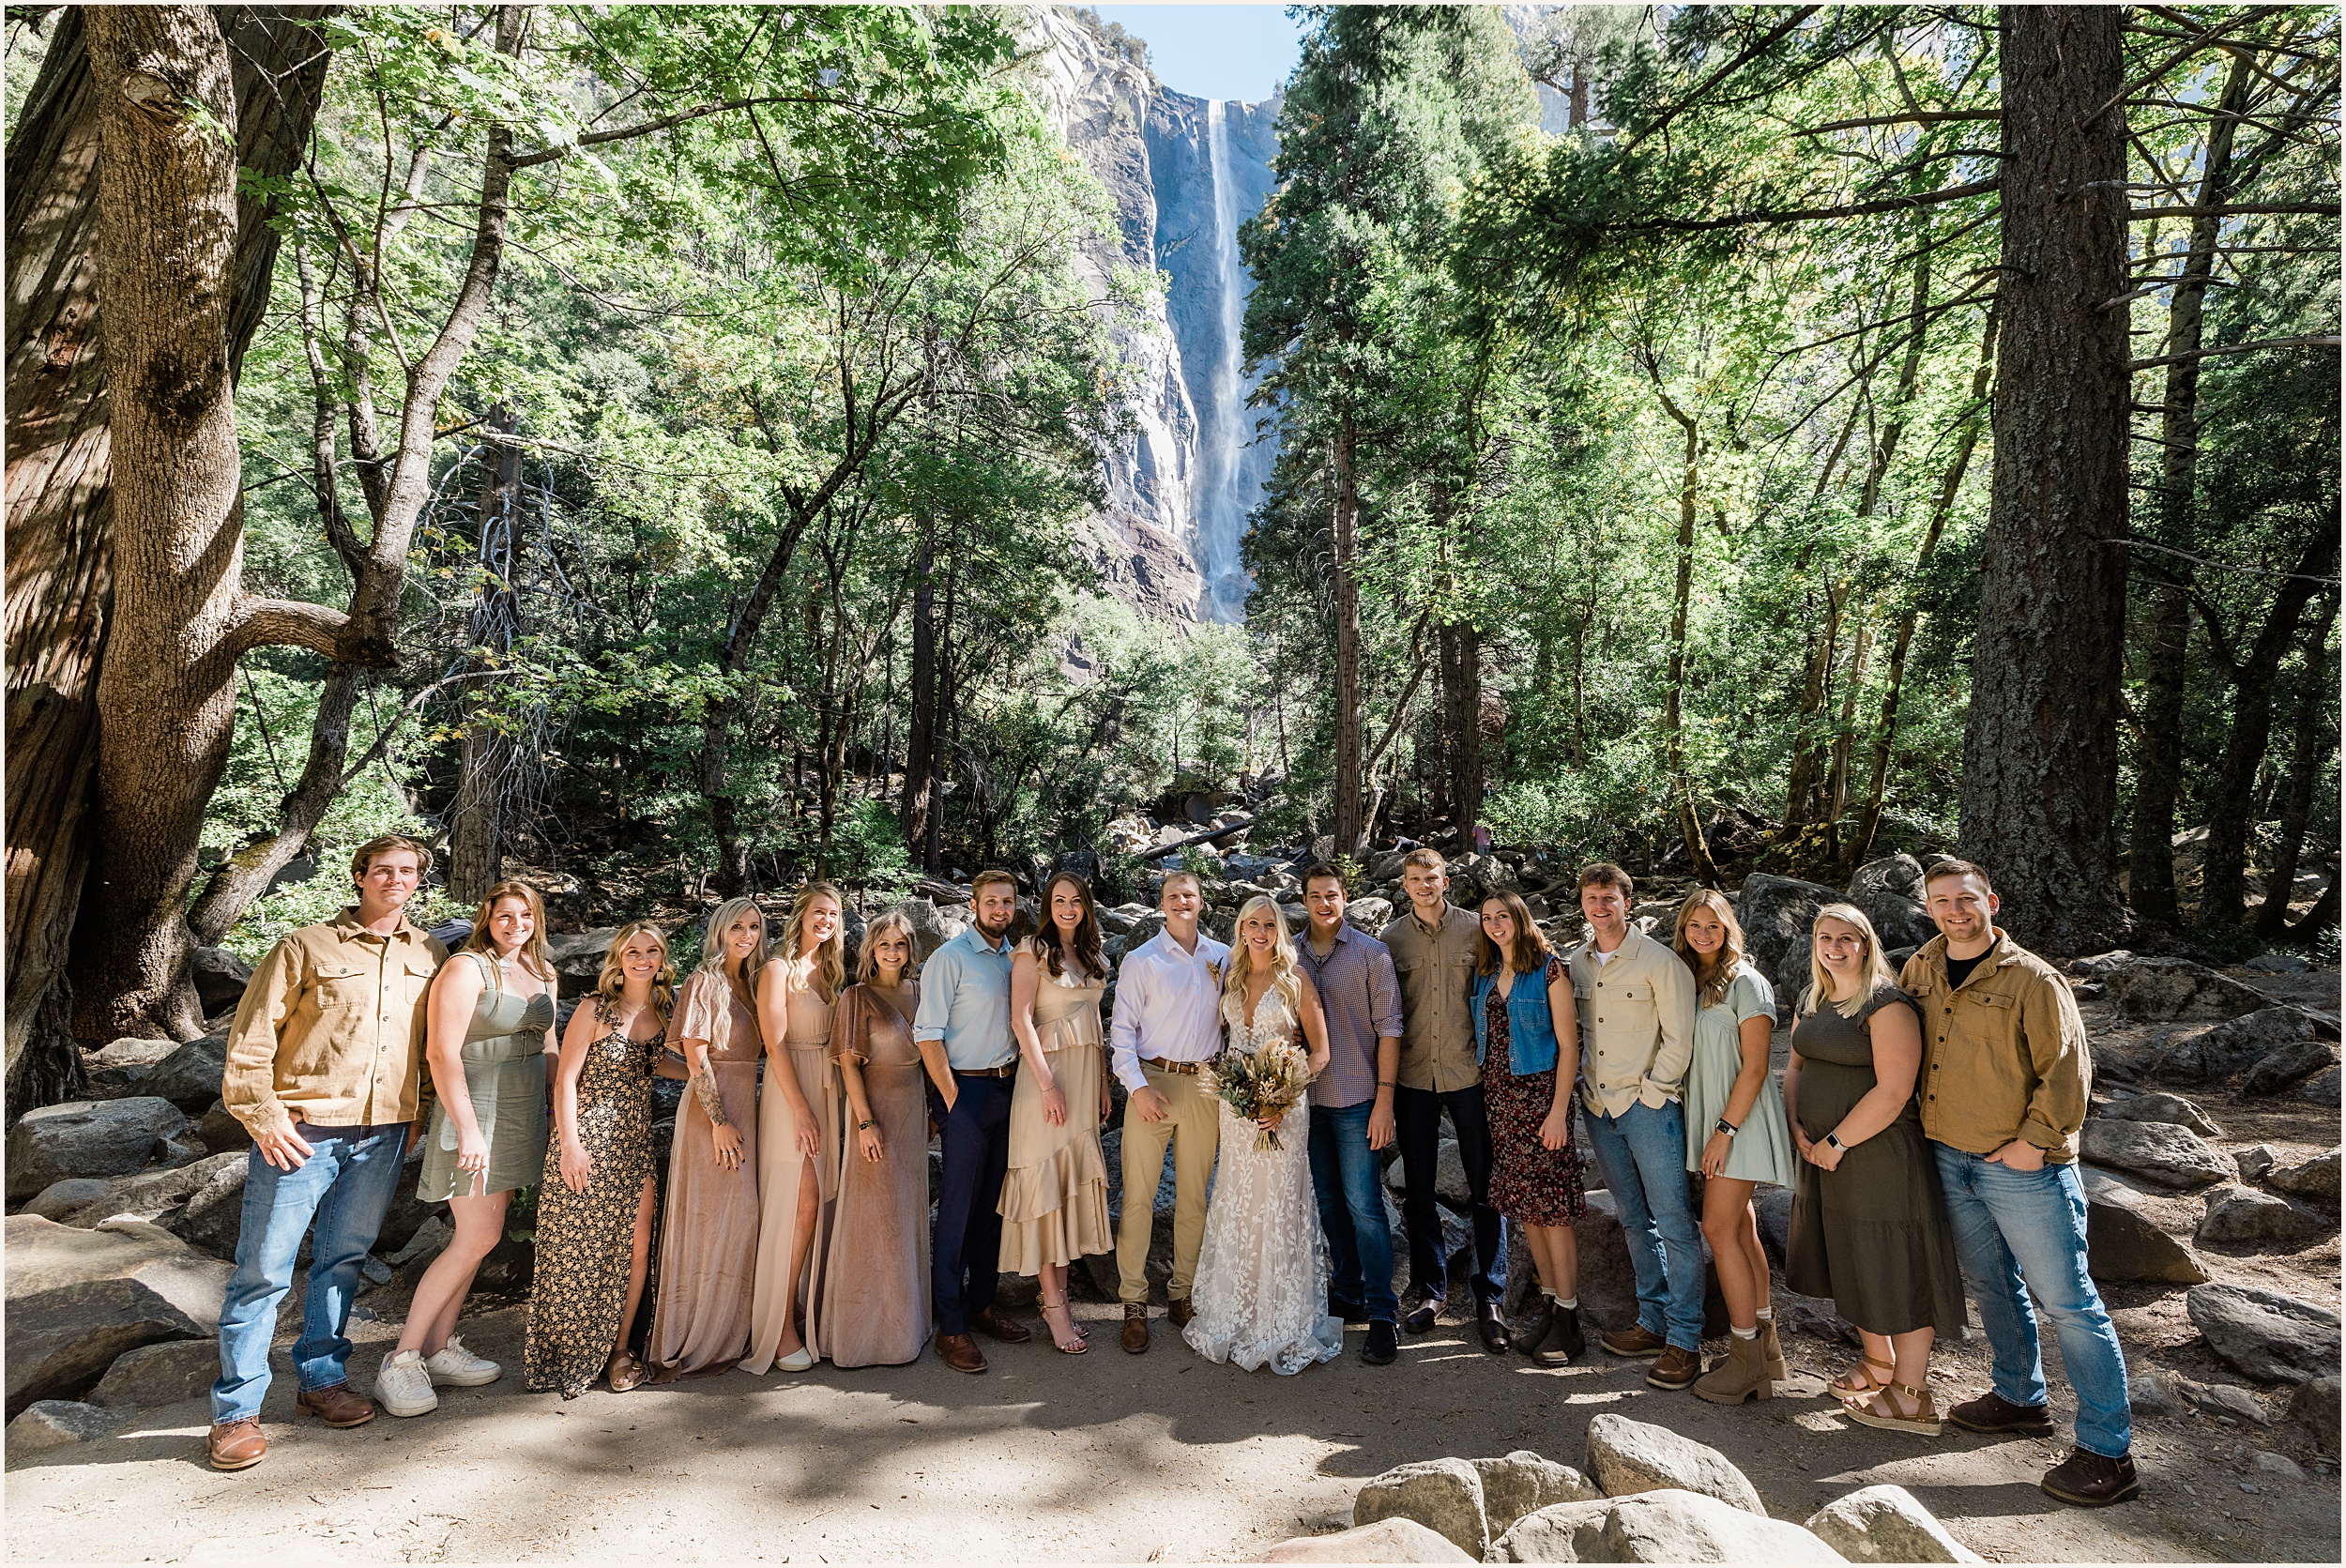 Kylea-and-Ethan_Getting-Married-In-Yosemite_0042 Bridalveil Falls Ceremony & Dreamy Taft Point Yosemite Elopement